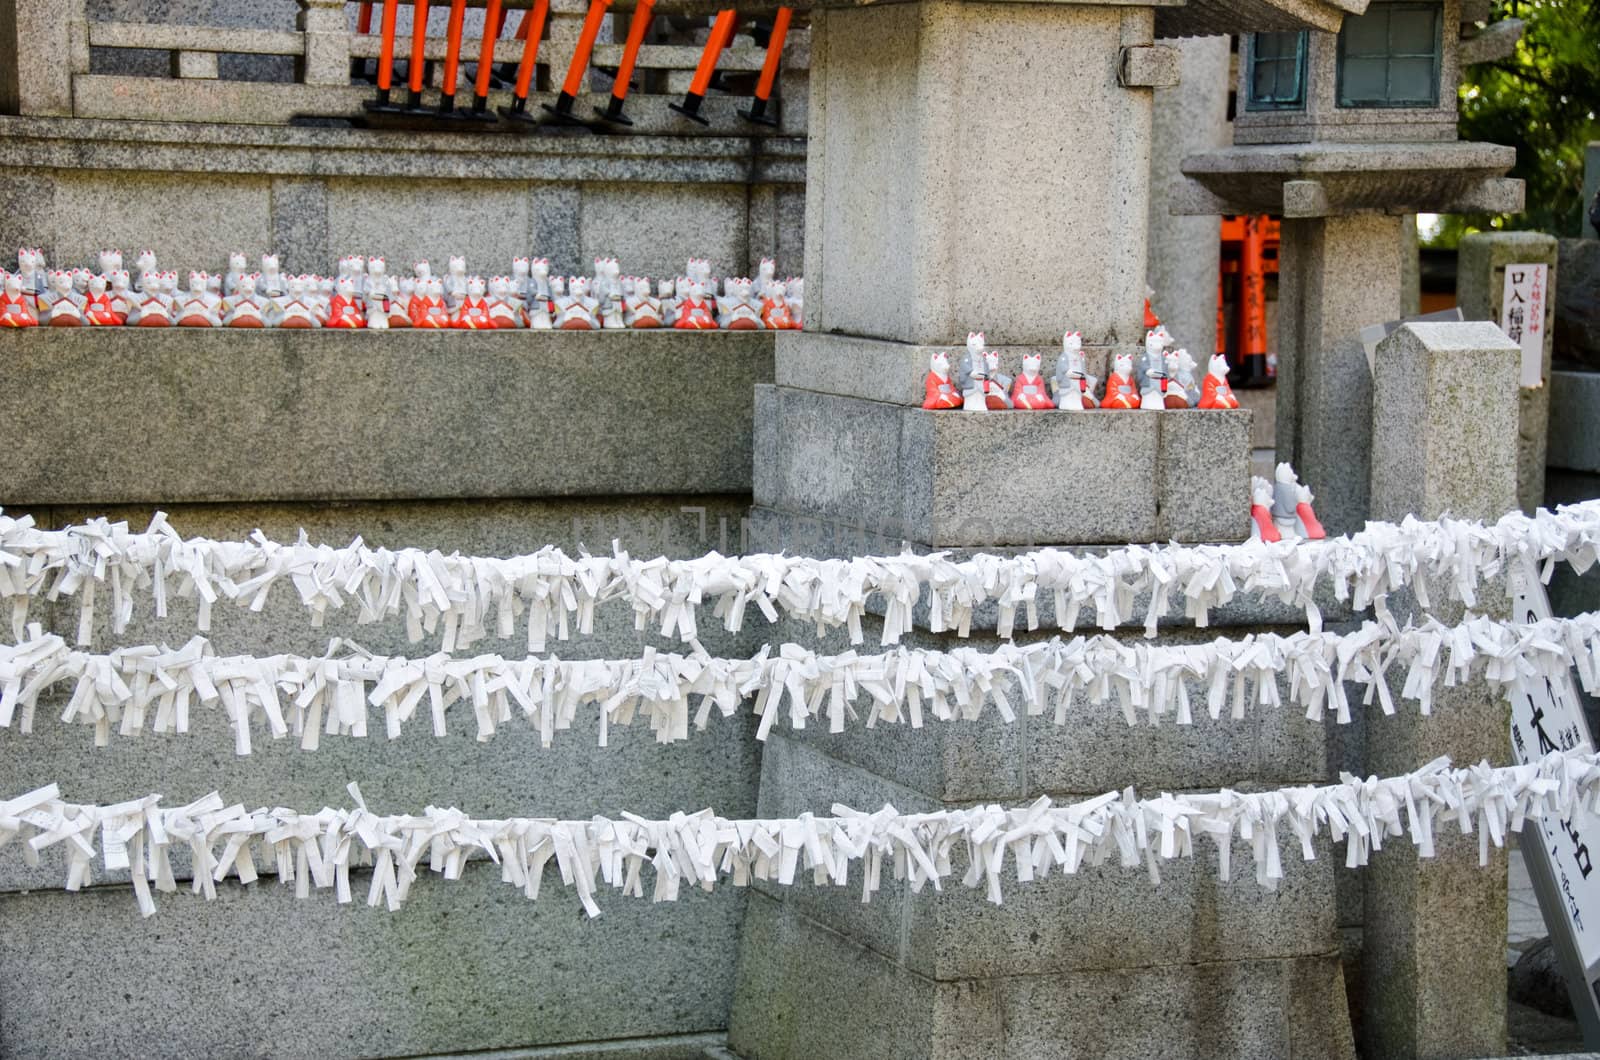 Omikuji are random fortunes written on strips of paper at Shinto shrines and Buddhist temples in Japan